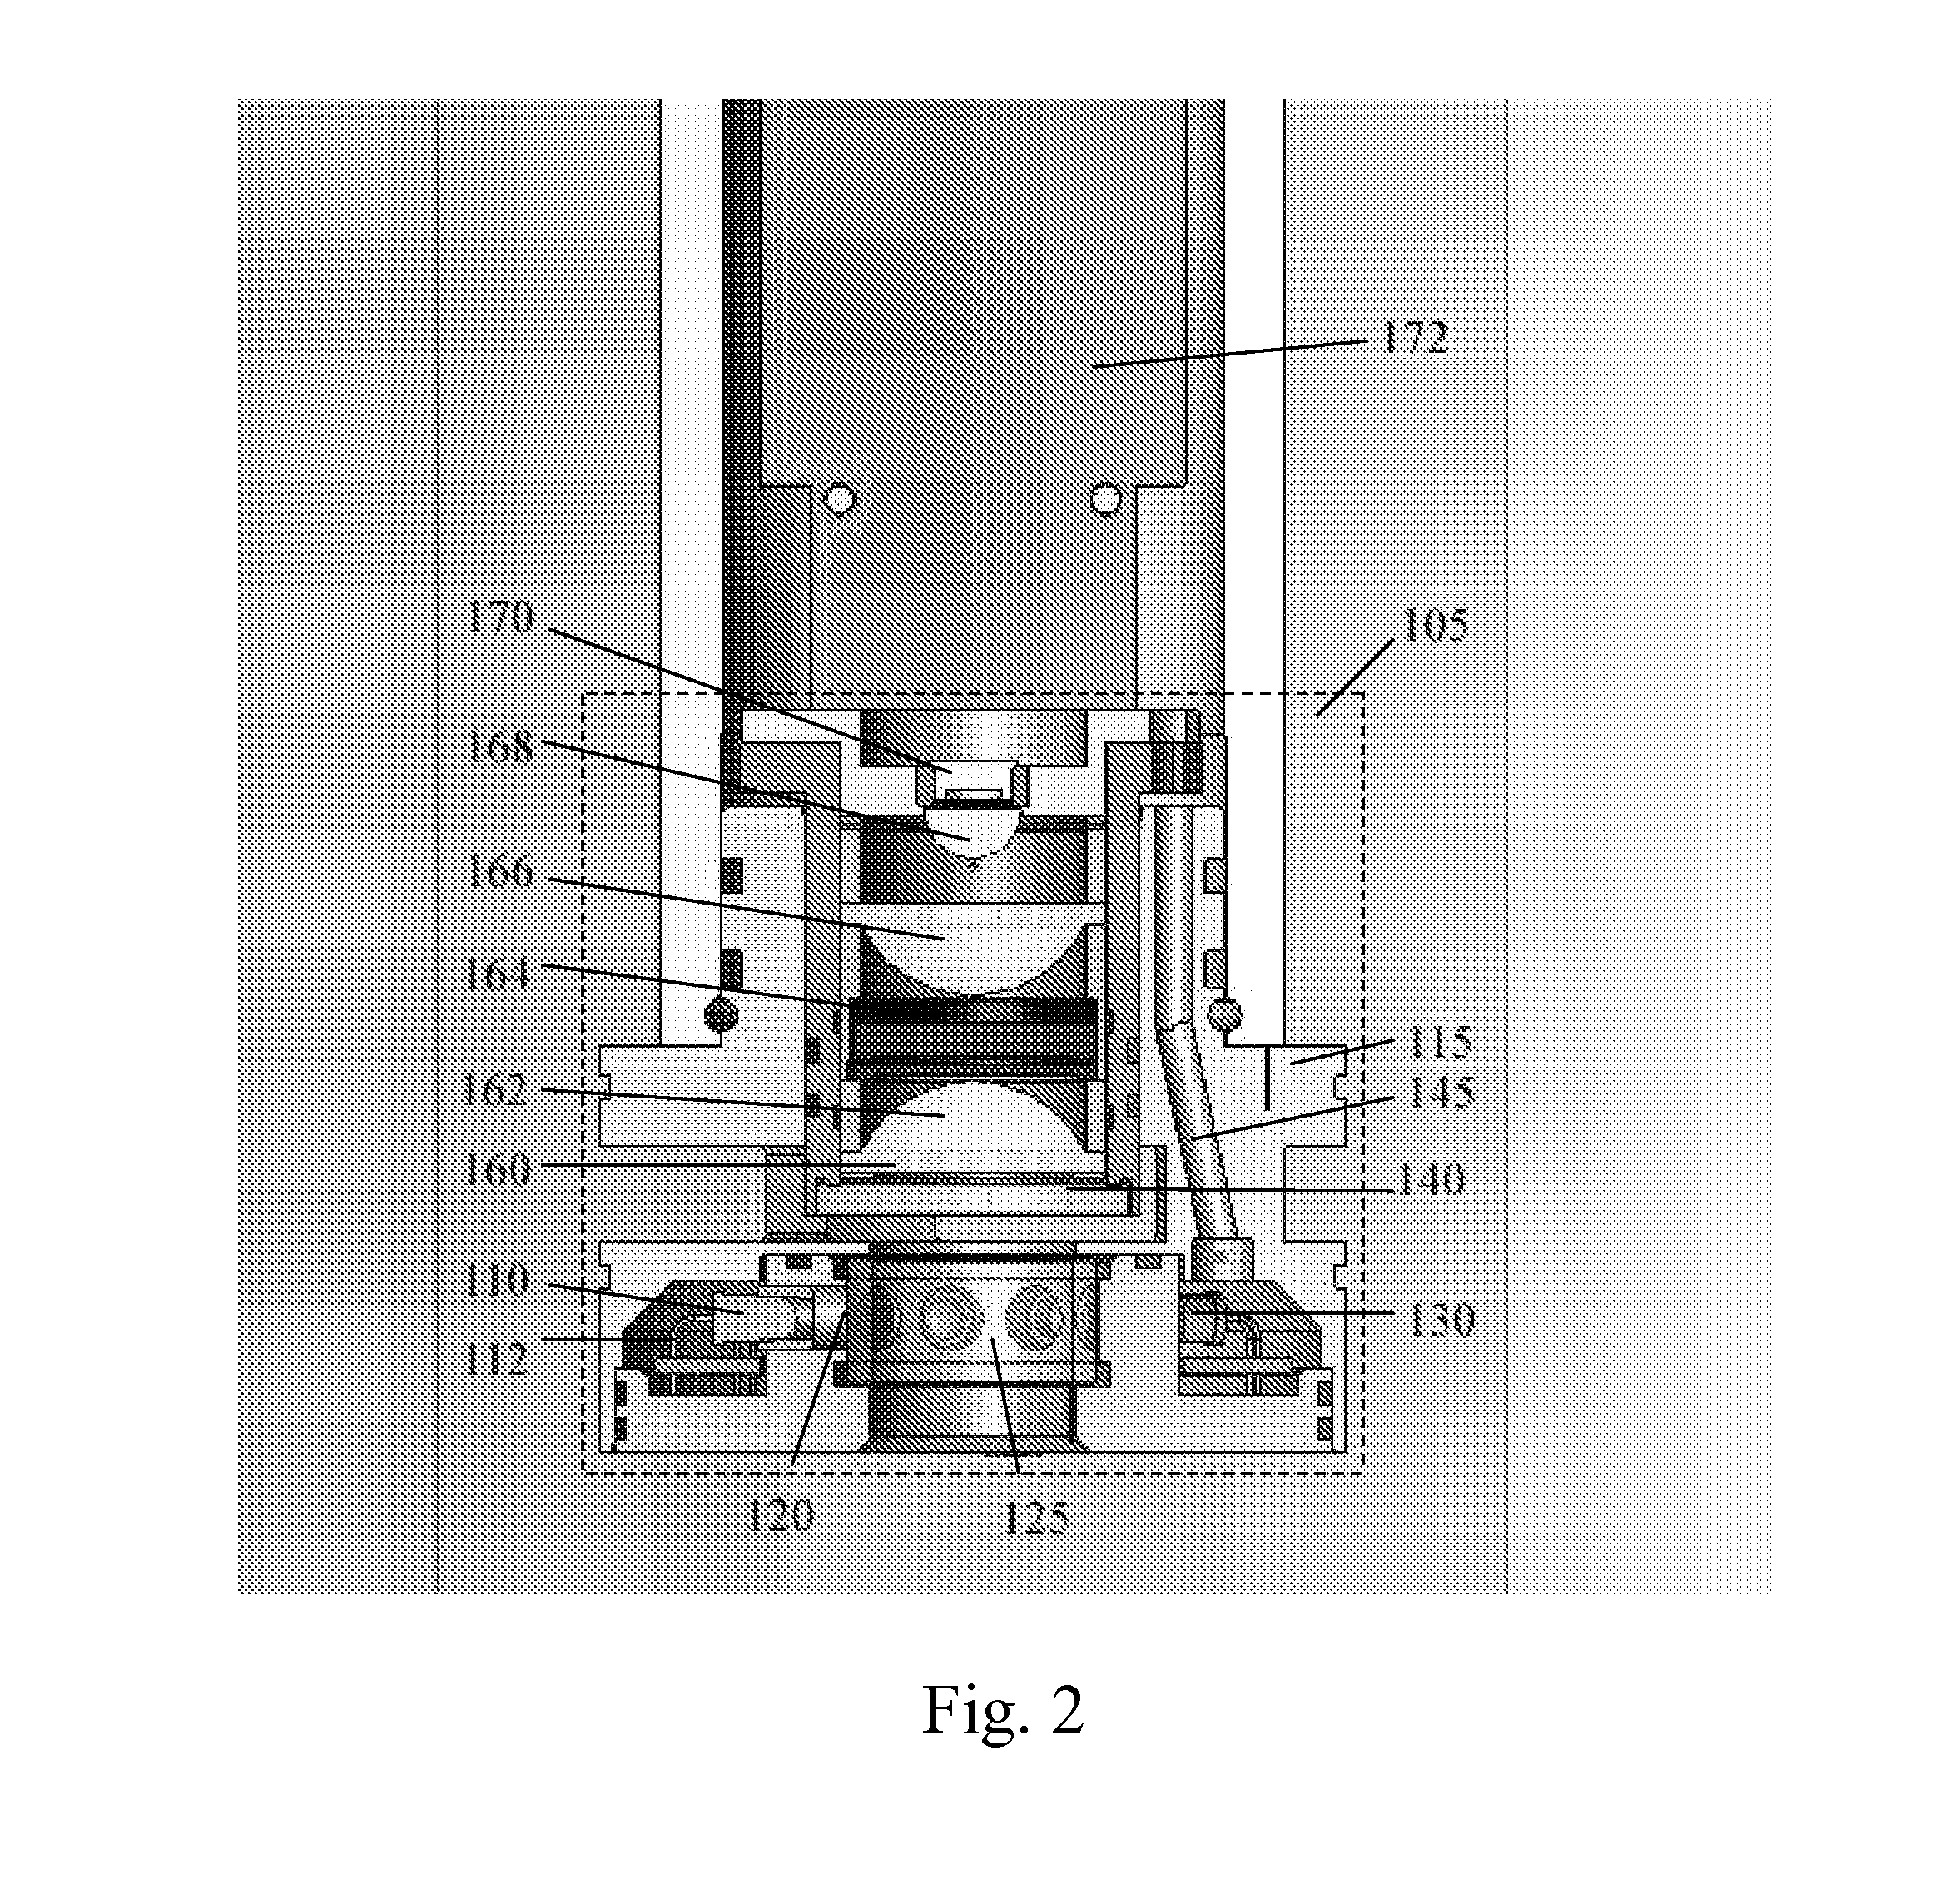 Submersible apparatus for measuring active fluorescence